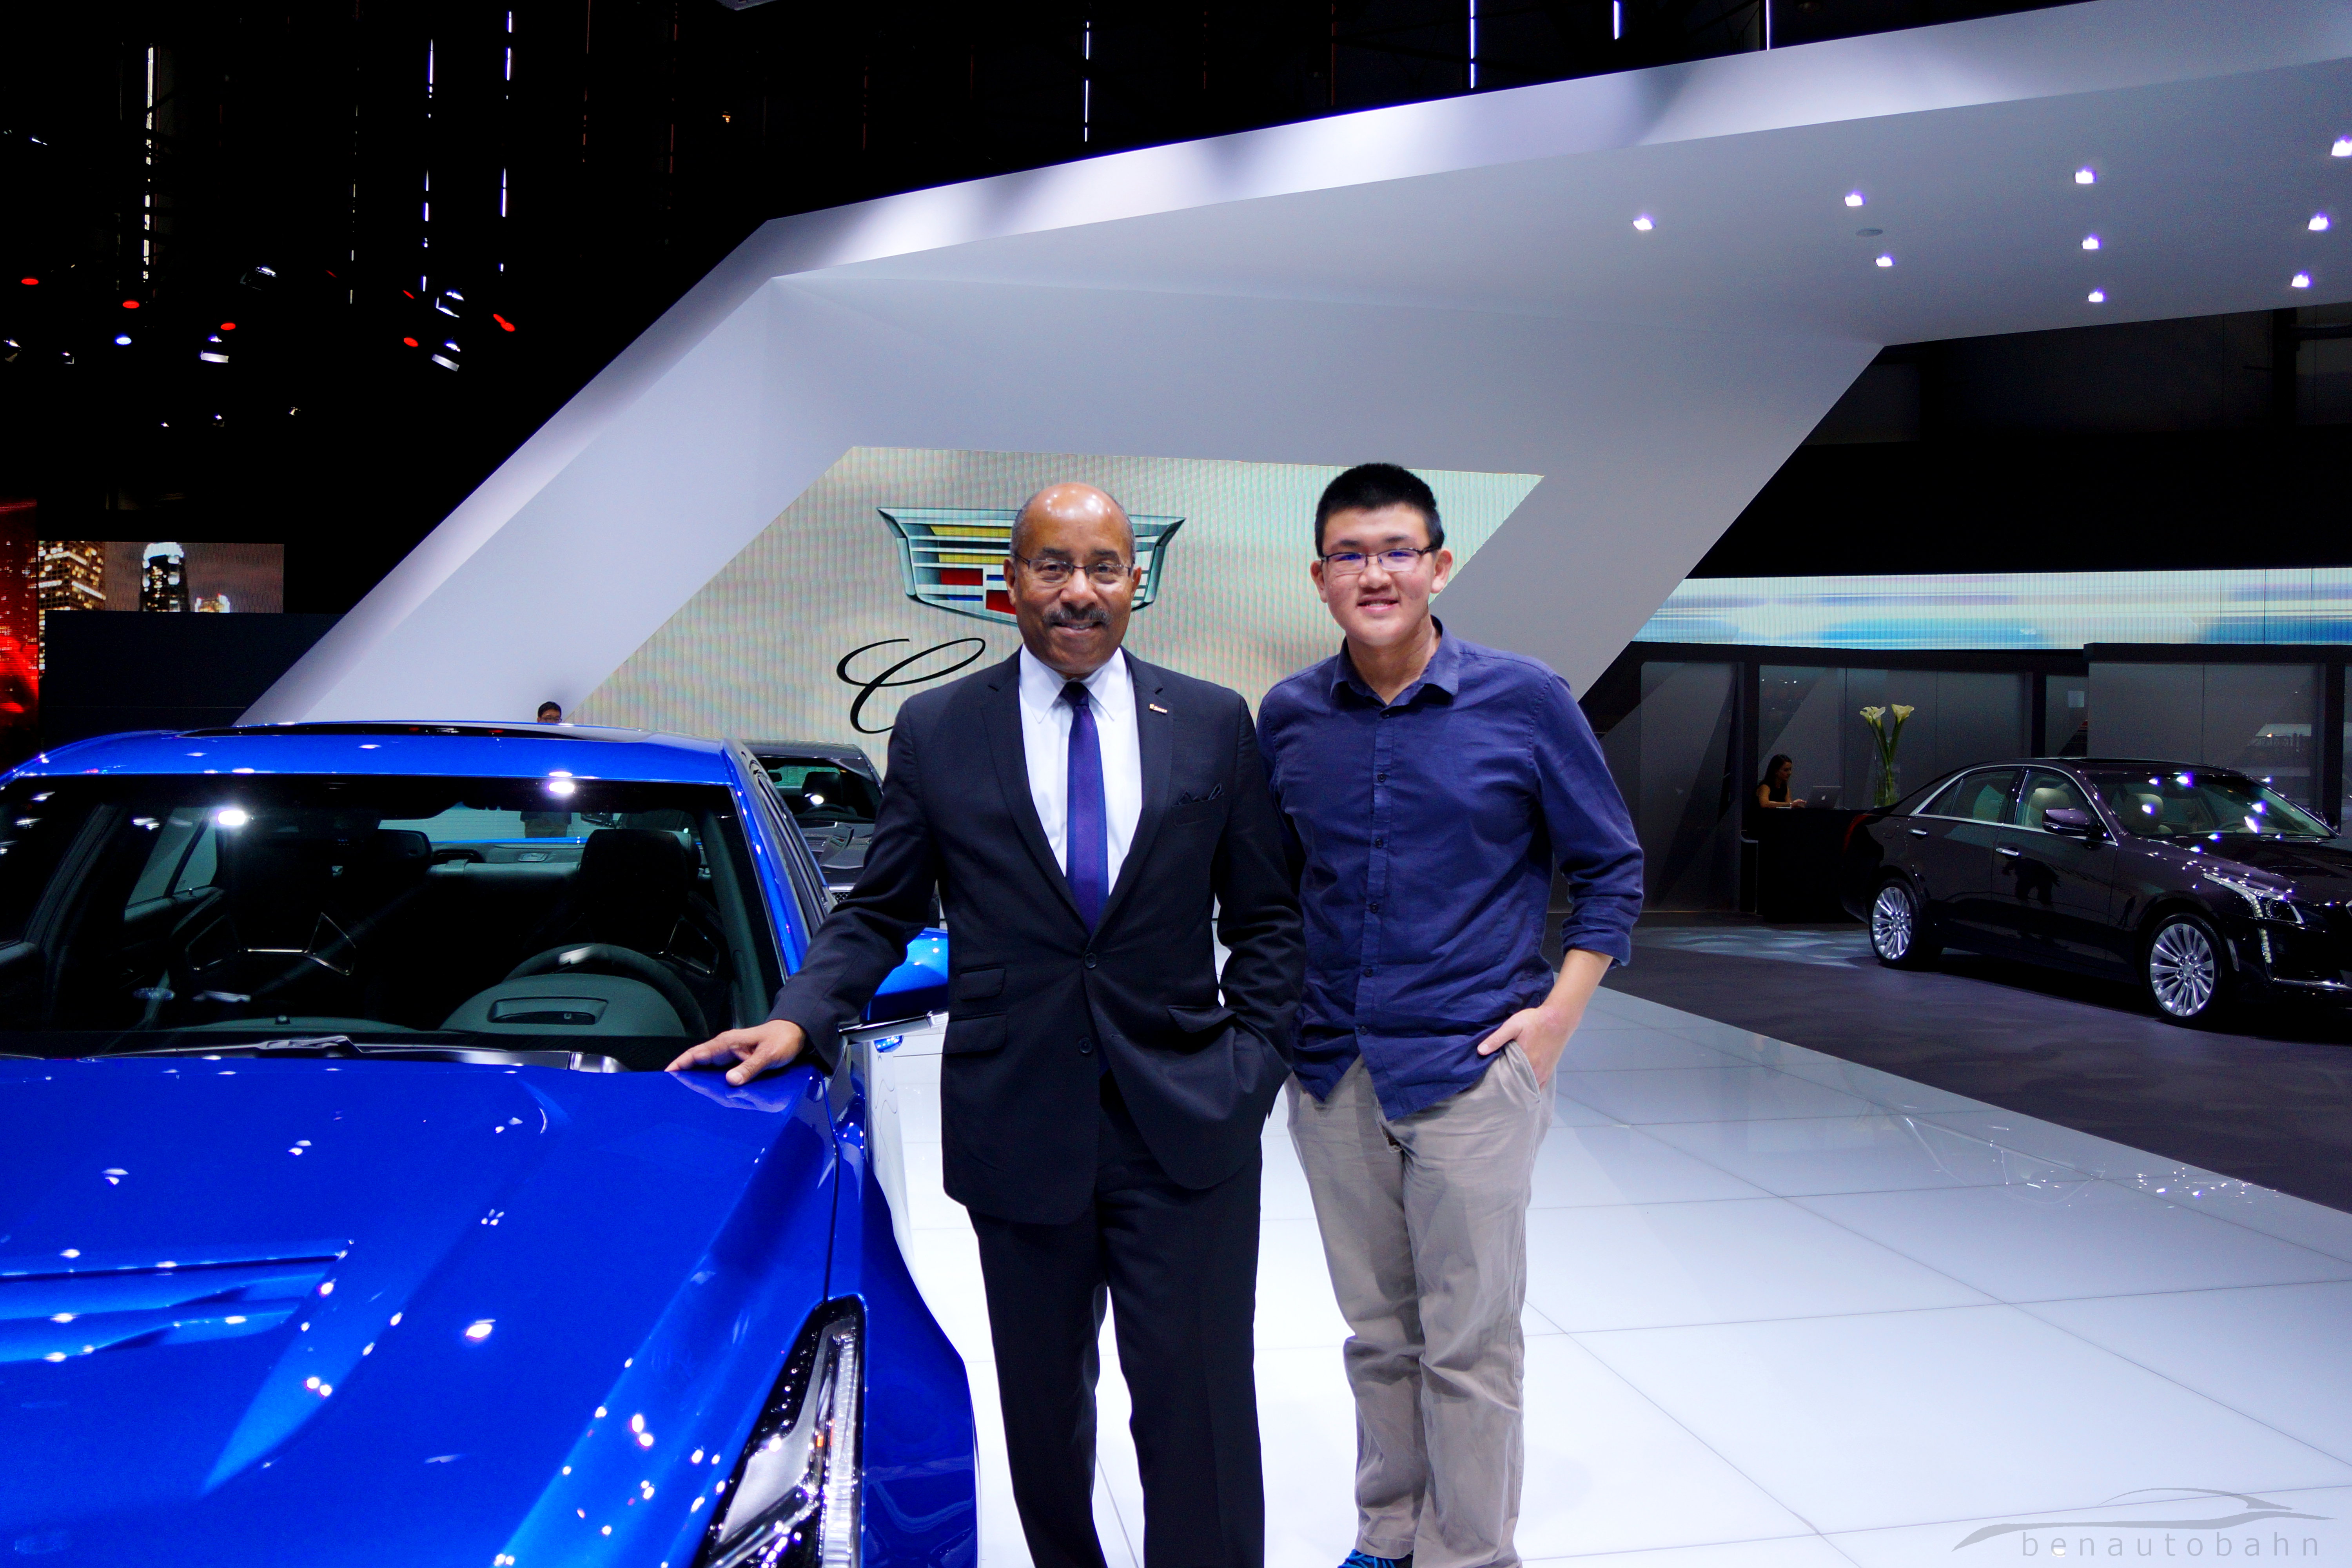 With Edward Welburn, GM vice president of global design.